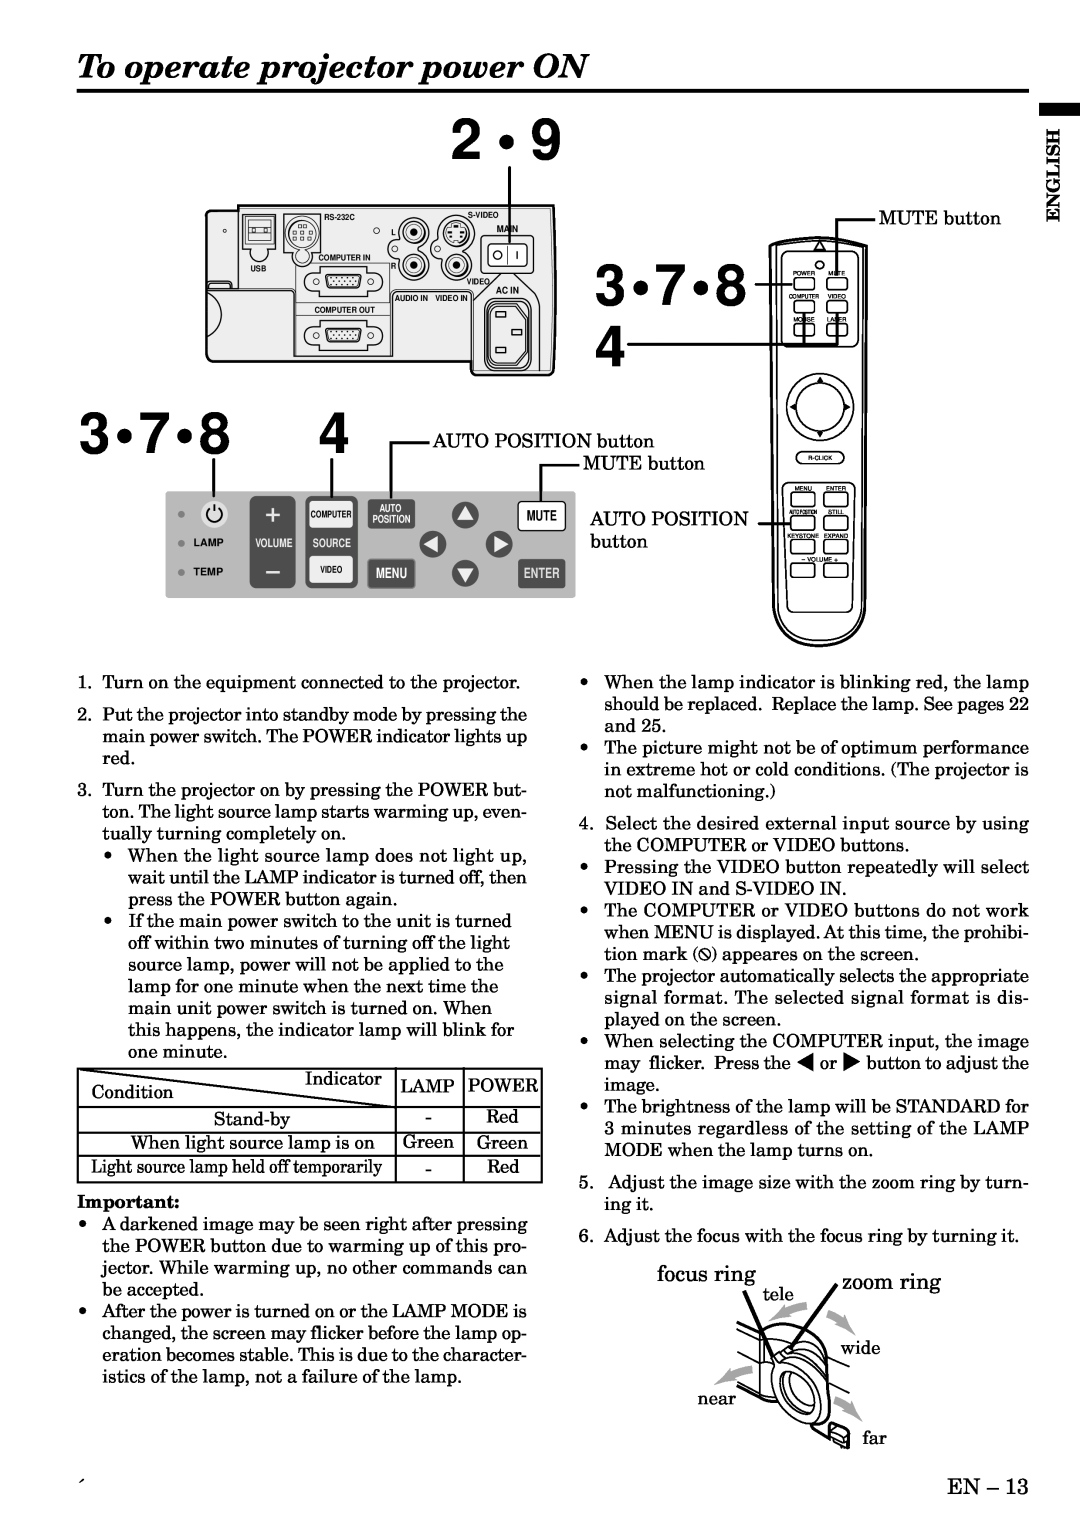 Mitsubishi Electronics XL1U user manual To operate projector power ON, AUTO POSITION button MUTE button, English 